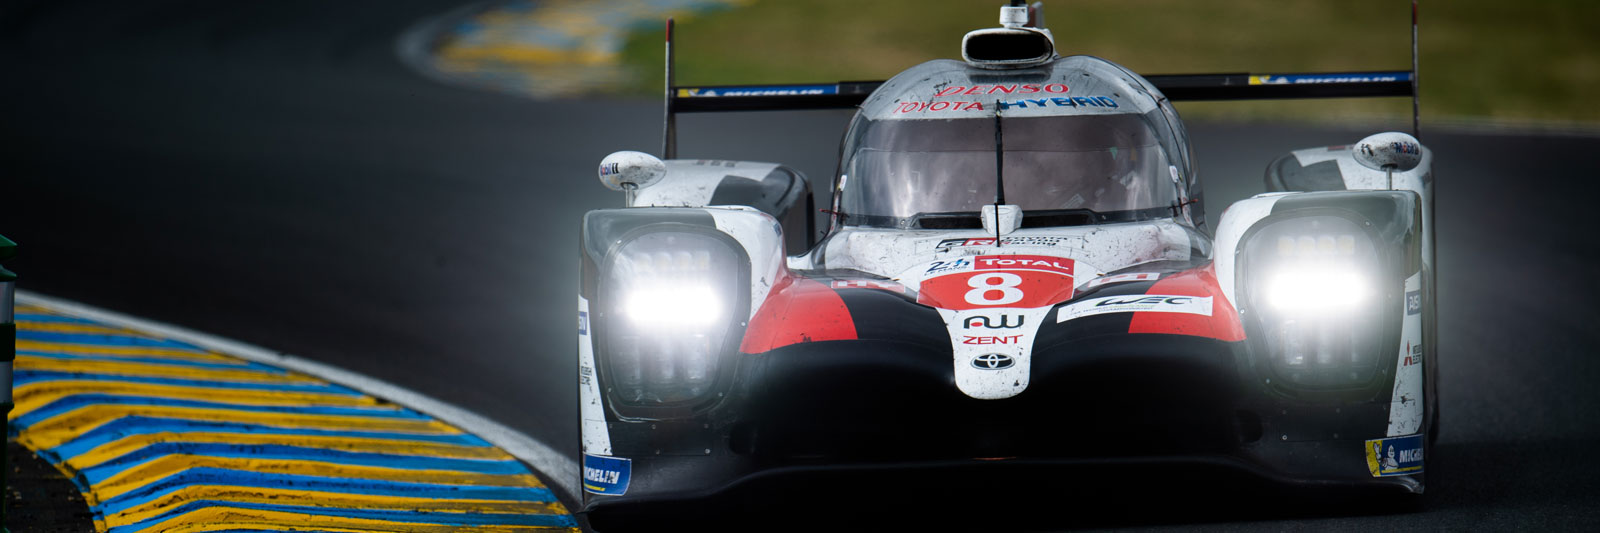 24 Hours of Le Mans with Grand Prix Tours